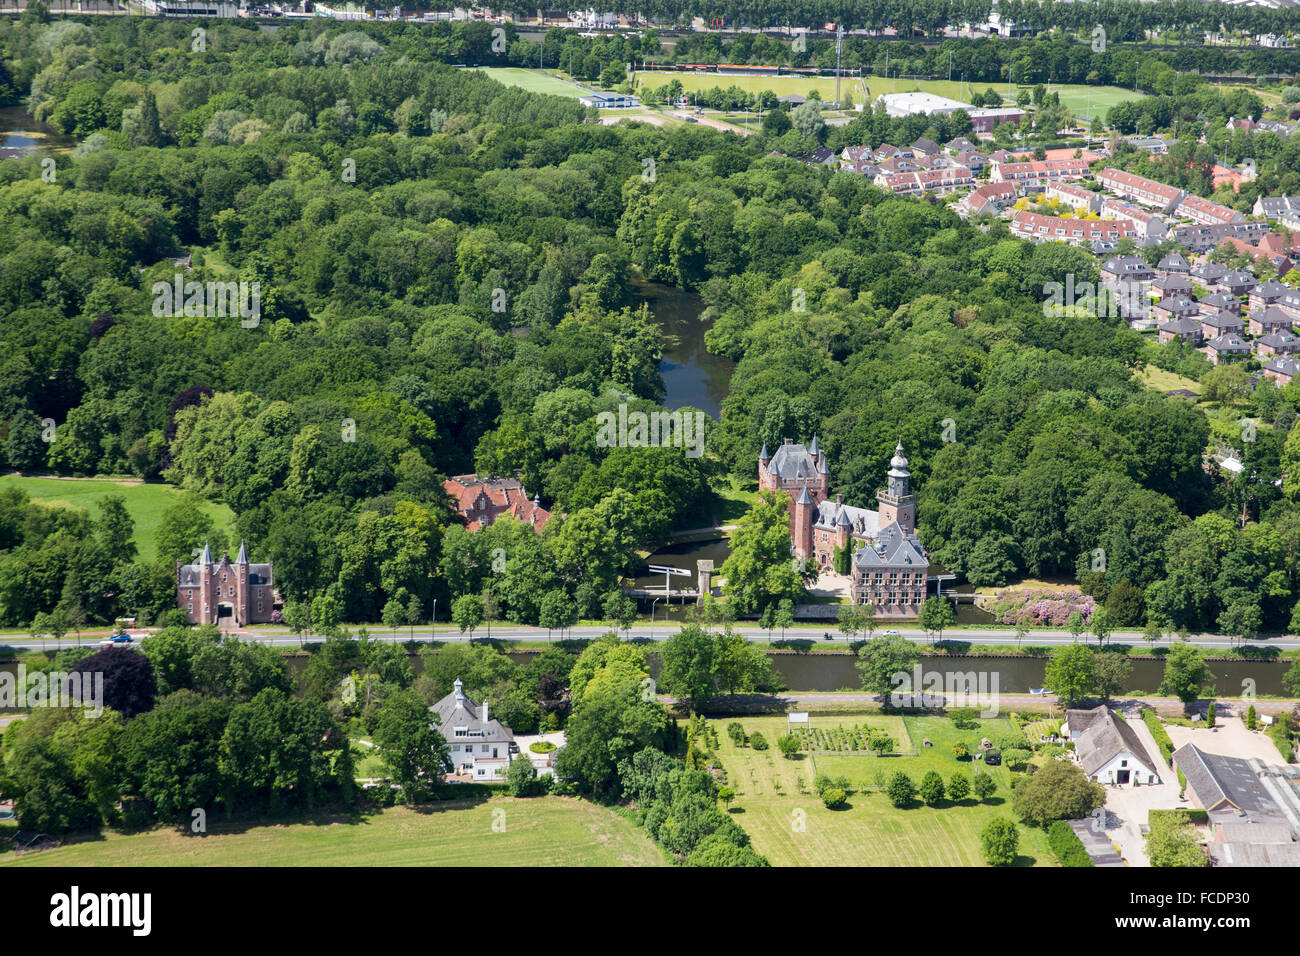 Netherlands, Breukelen, Aerial view of castle Nyenrode or Nijenrode and park. Home to the Nyenrode Business University Stock Photo